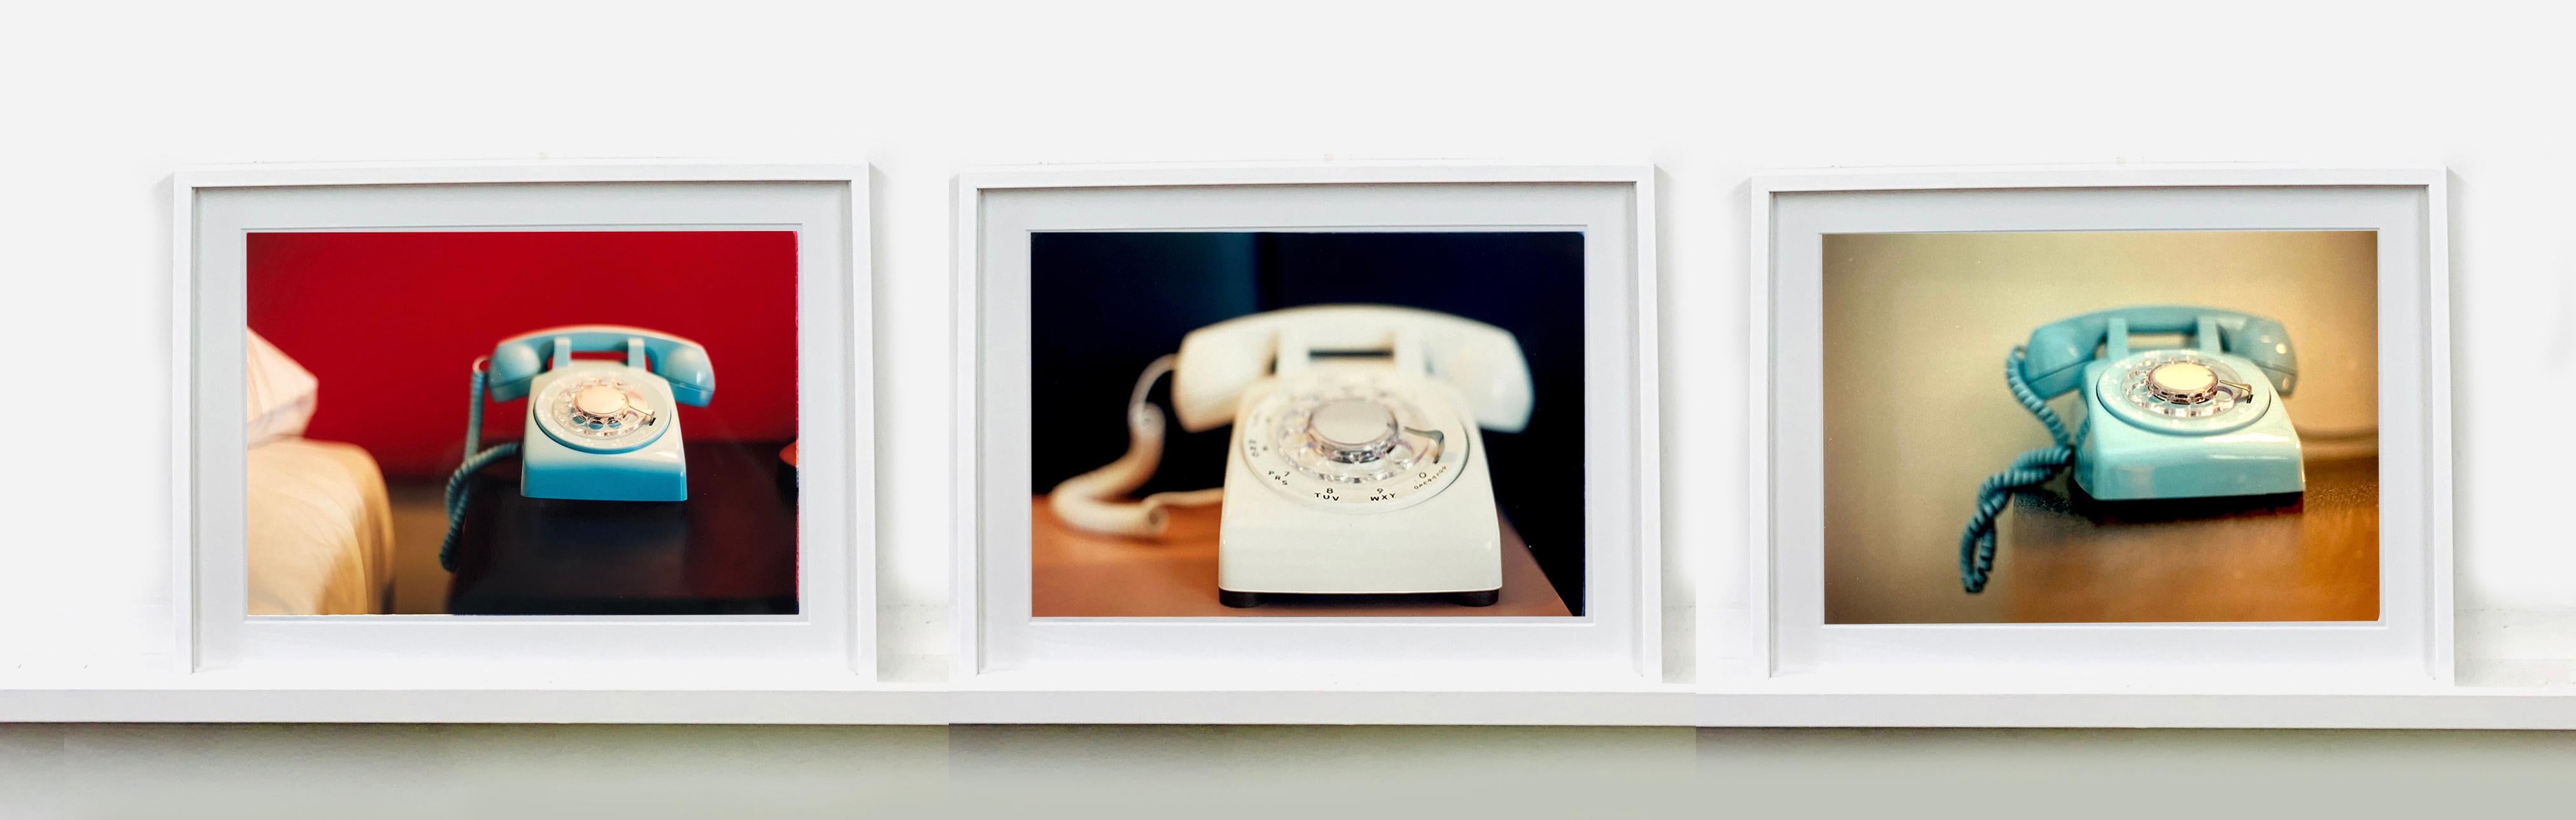 Telephone I, Ballantines Movie Colony, Palm Springs - Interior Color Photography For Sale 8